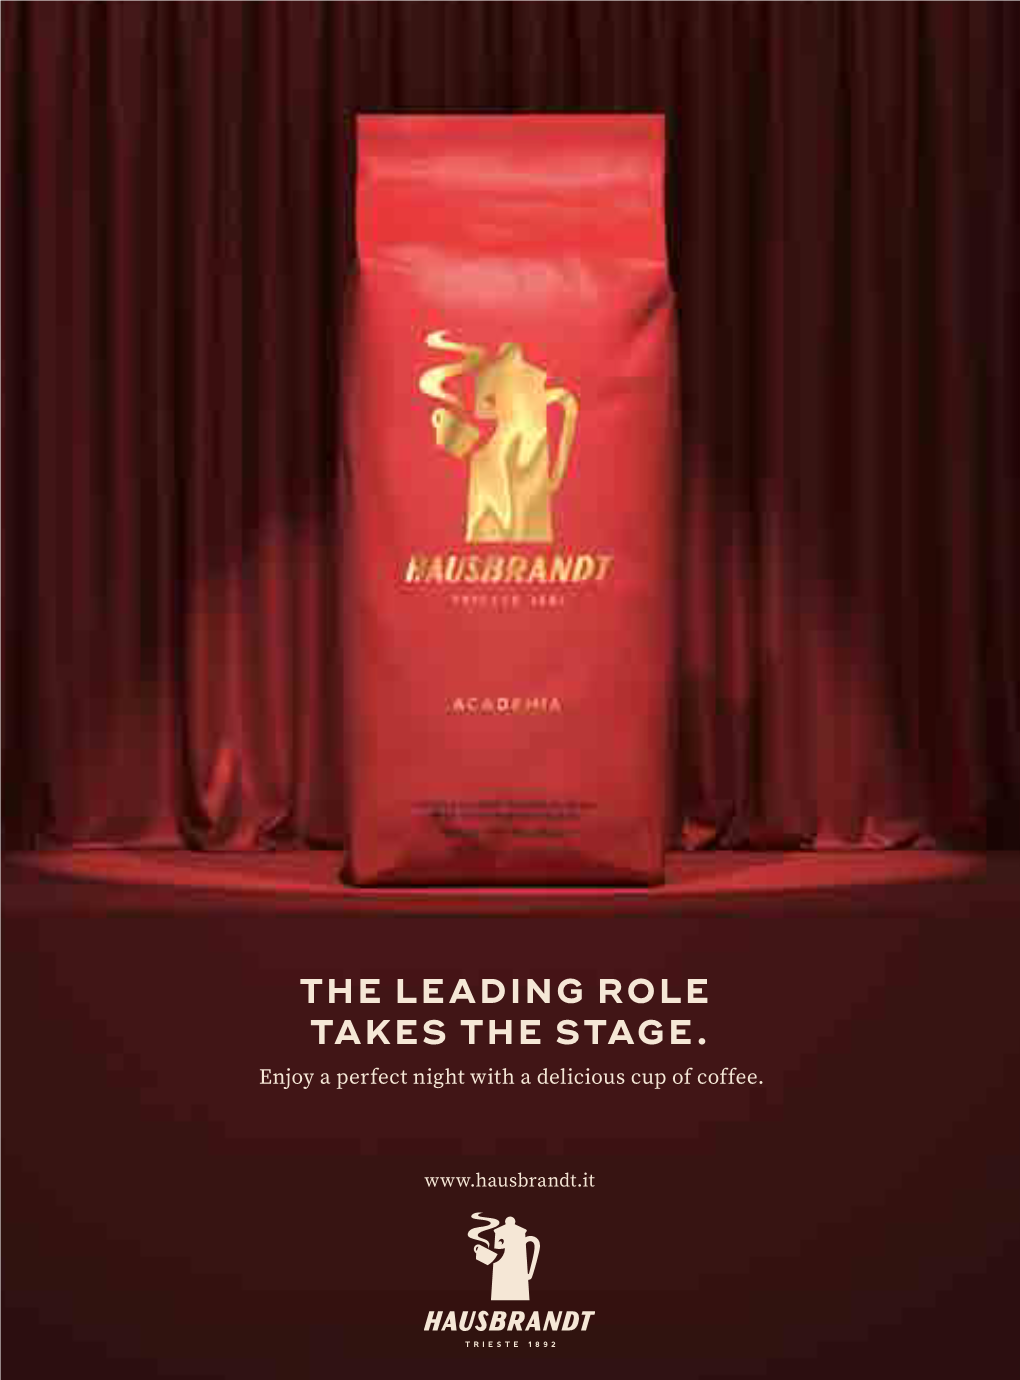 THE LEADING ROLE TAKES the STAGE. Enjoy a Perfect Night with a Delicious Cup of Coffee